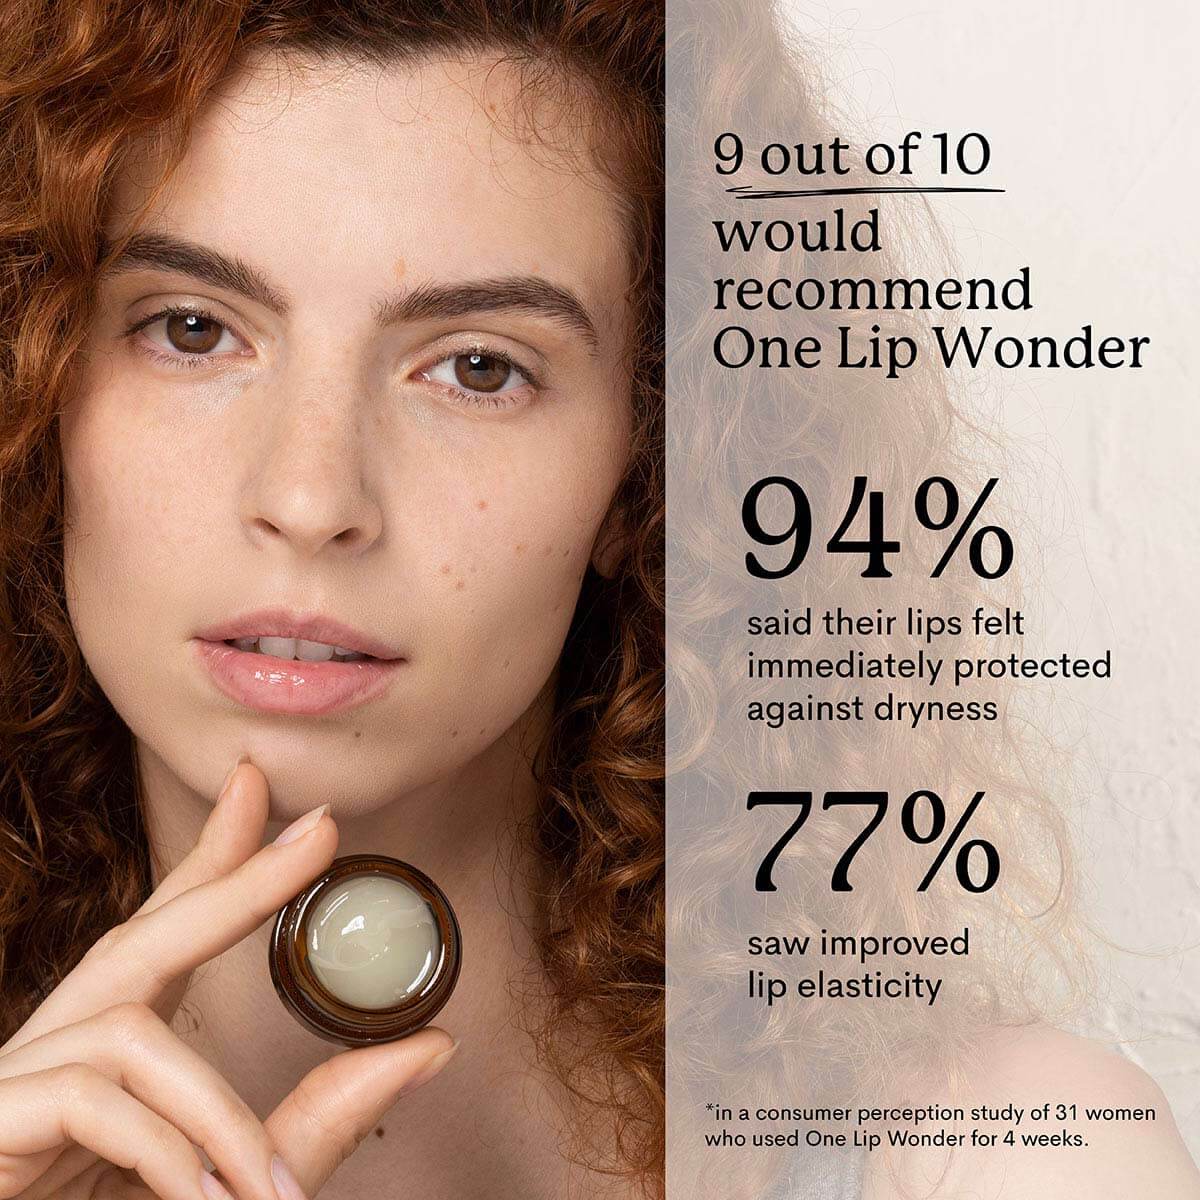 woman holding up lip treatment and stat showing 9 out of 10 would recommend One Lip Wonder